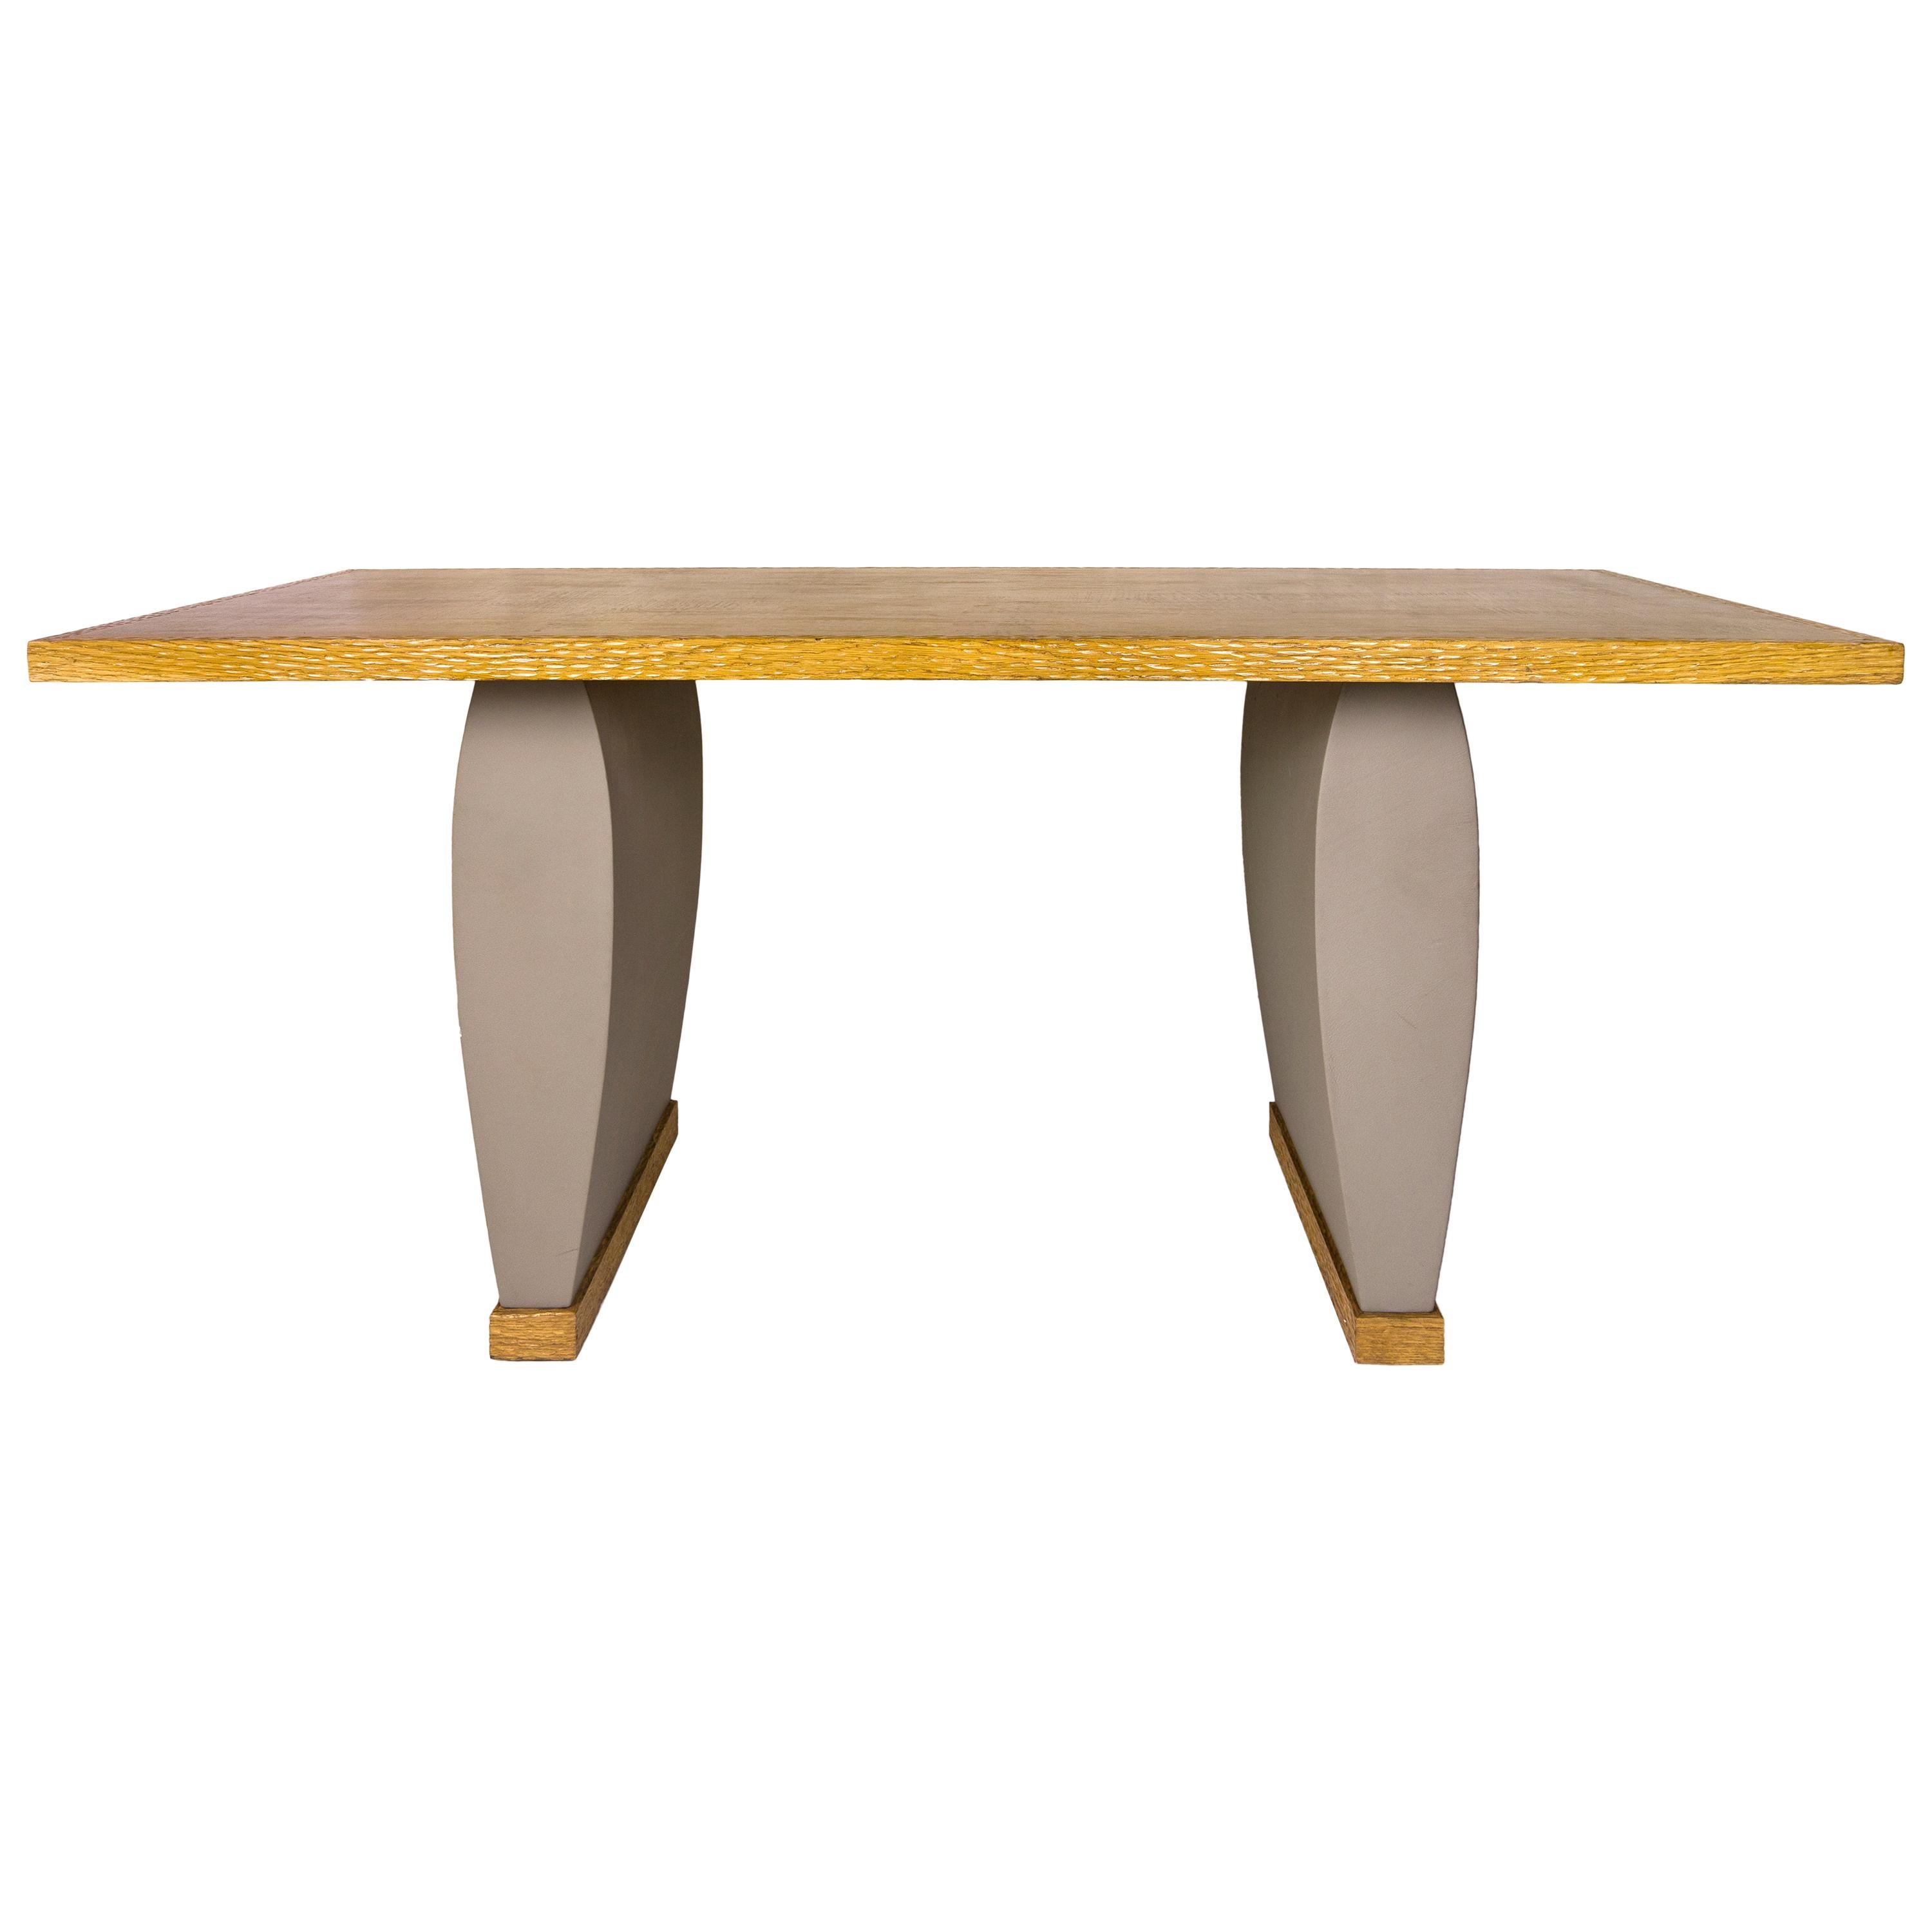 Olivier Gagnère, Neotù Table, Oak and Gray Leather, circa 1995, France